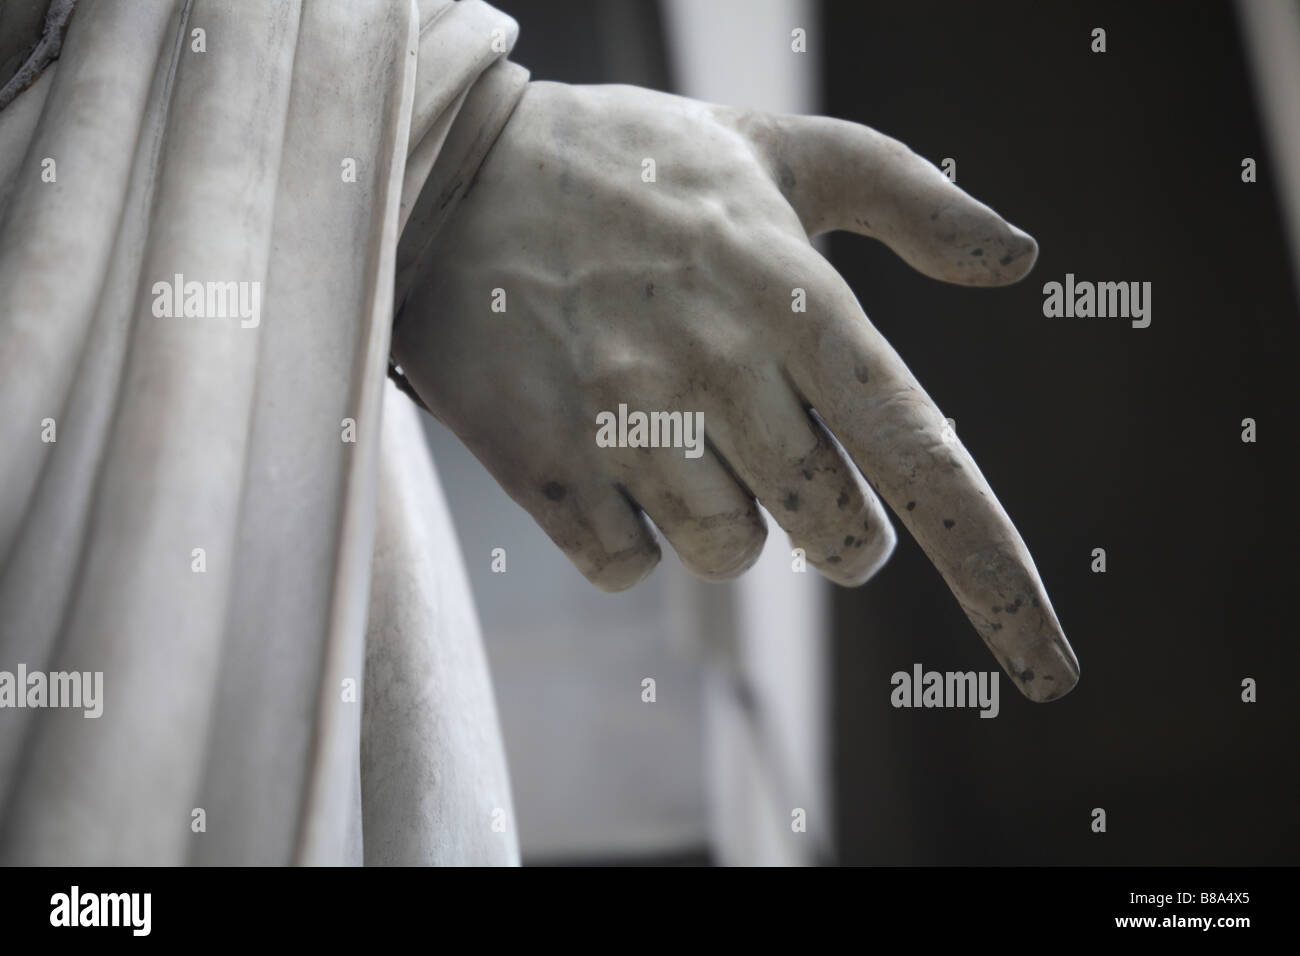 Italy,Tuscany,Florence,Palazzo Vecchio,Uffizi Gallery,Exterior,Sculpture Statue,Hand Pointing Stock Photo